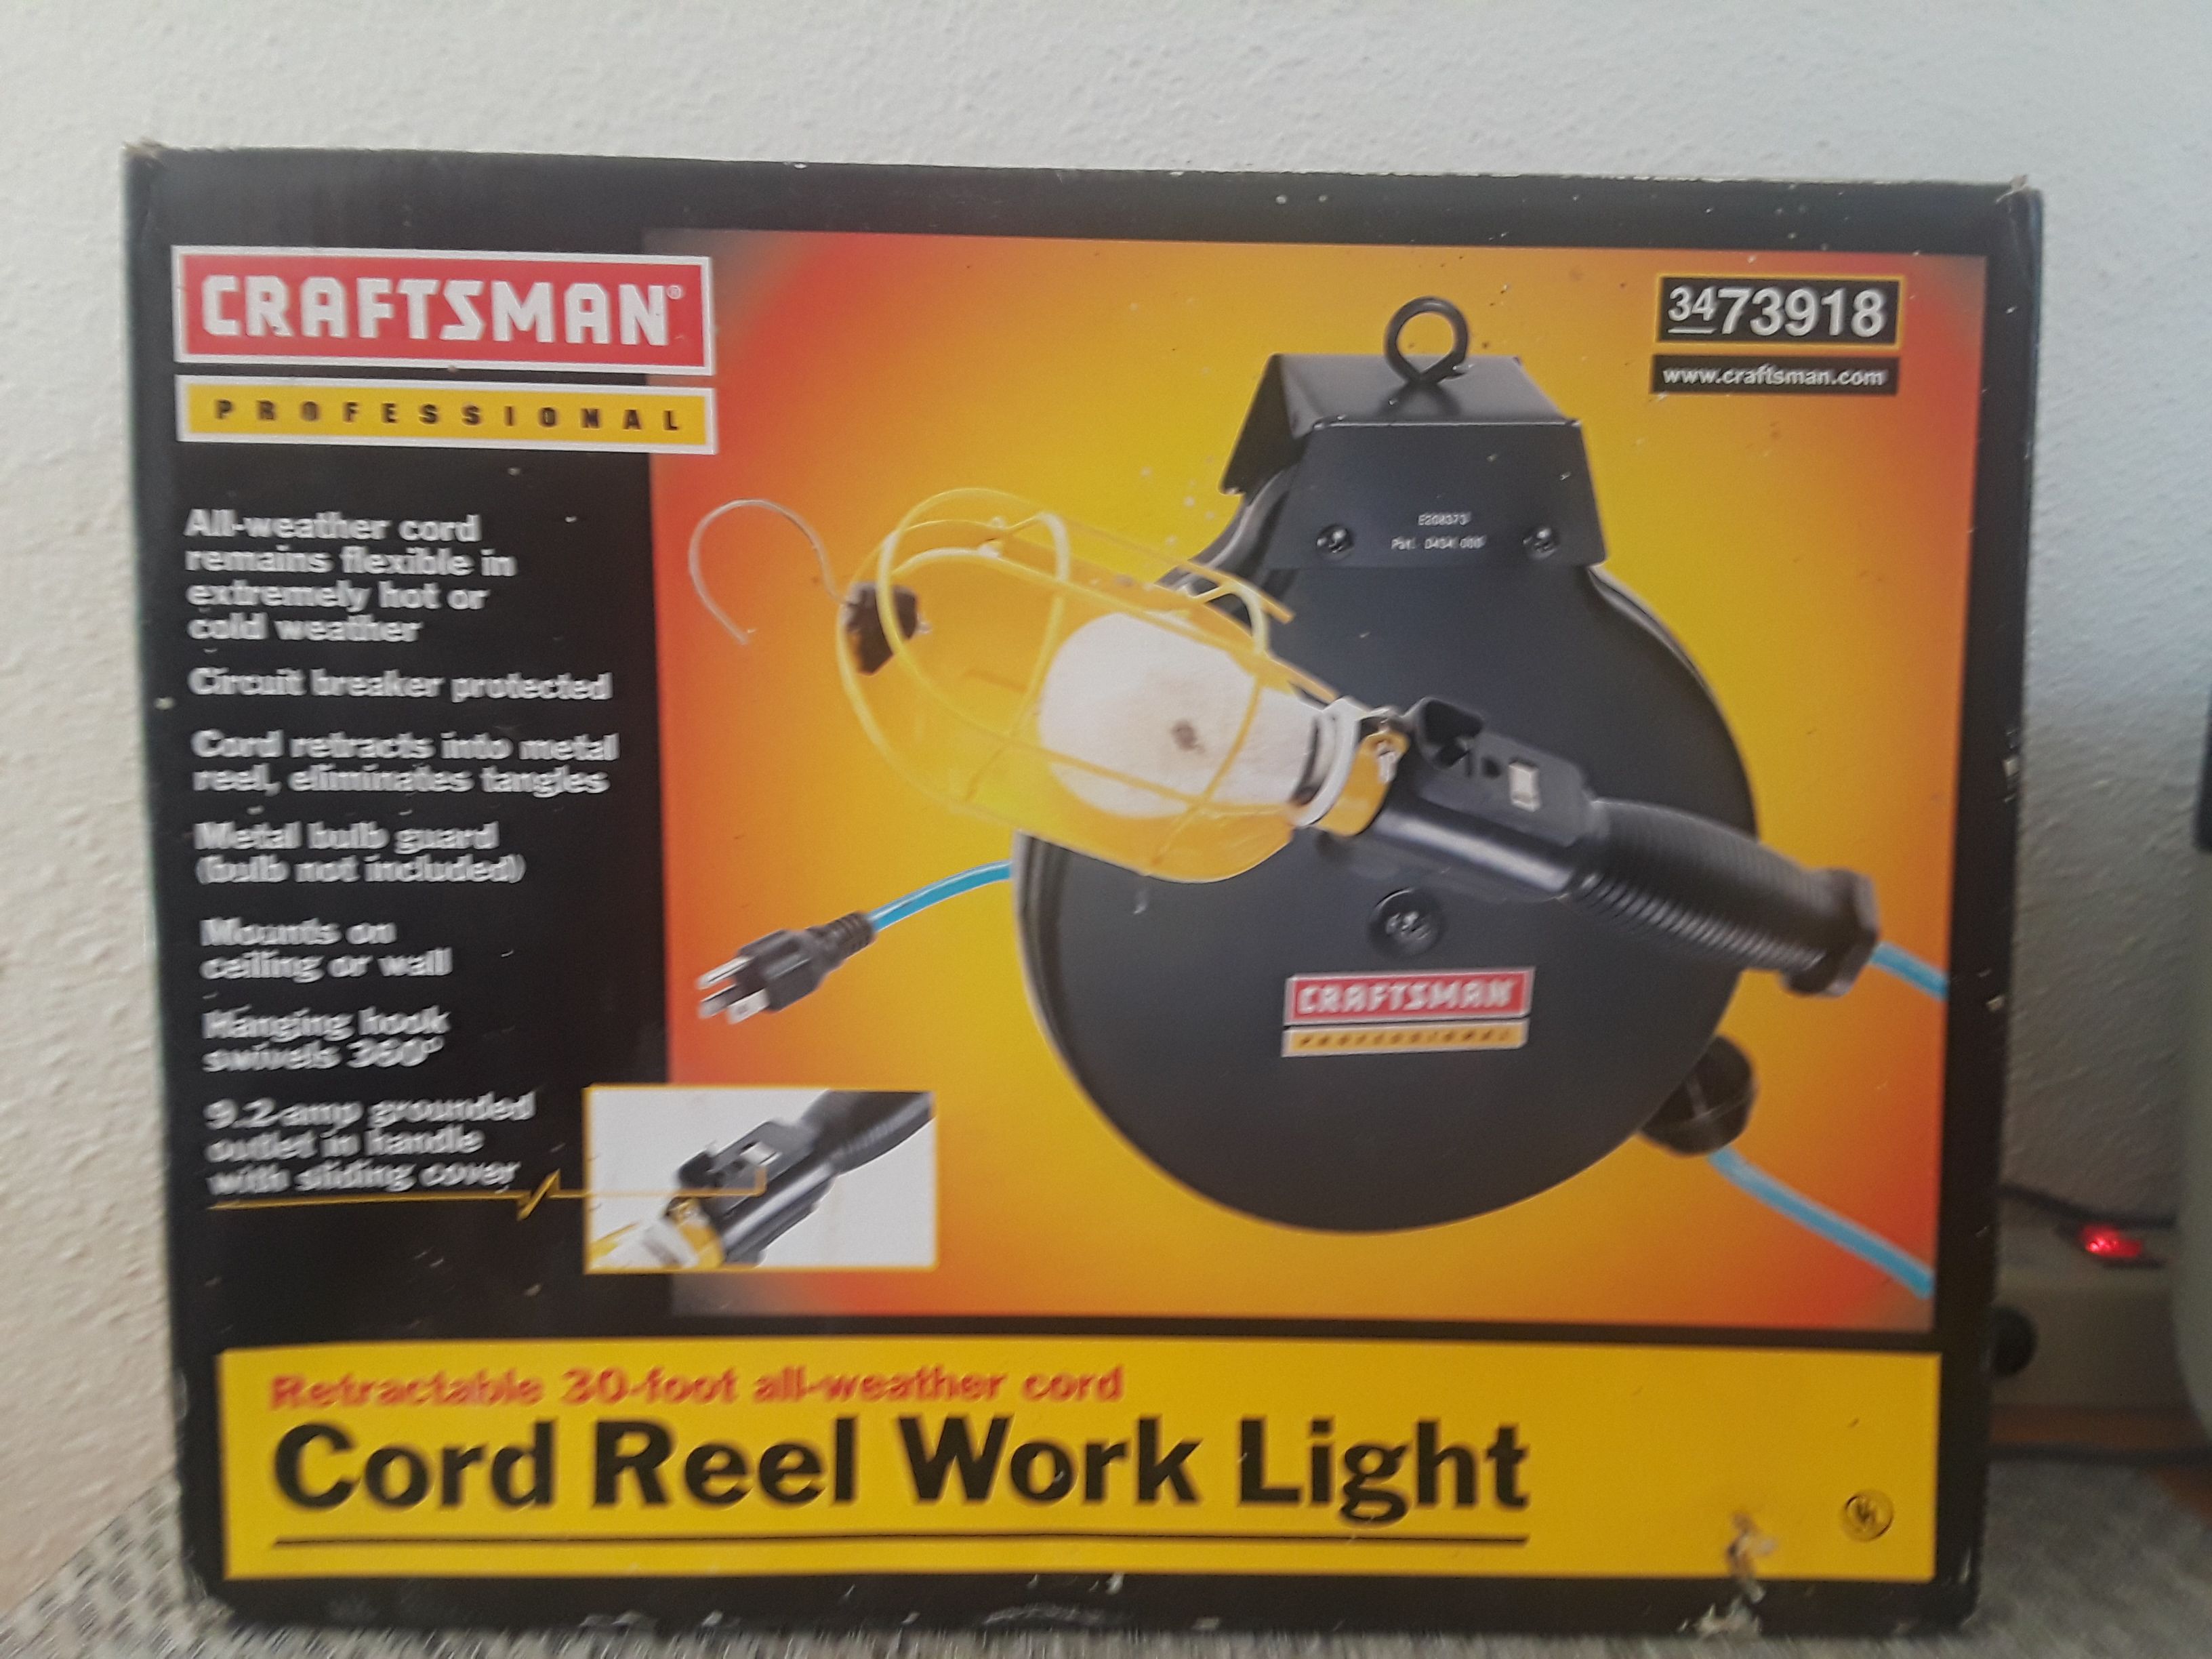 Craftsman cord reel work light. Still in the box for Sale in Shoreline, WA  - OfferUp